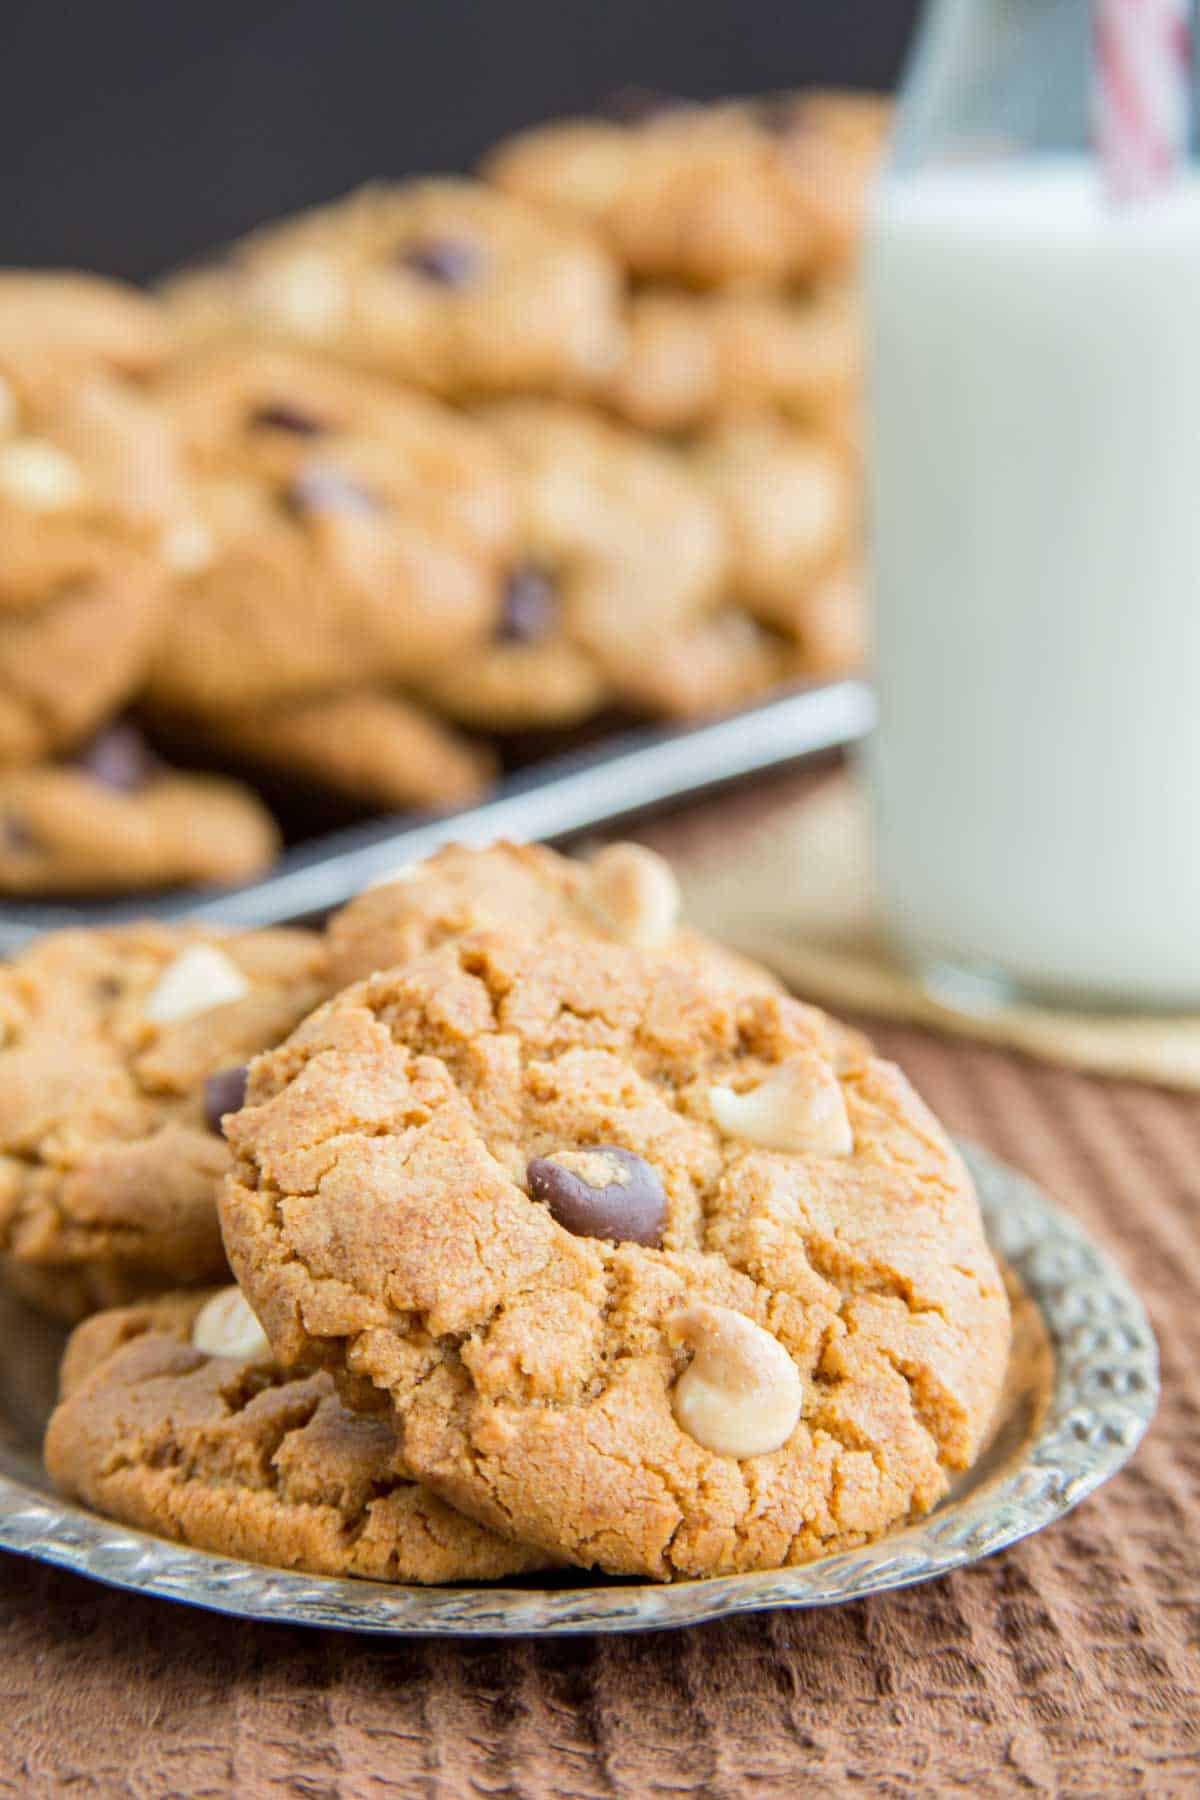 Three peanut butter chocolate chip cookies on a small oval silver plater with a glass bottle of milk and more cookies piled in the background.